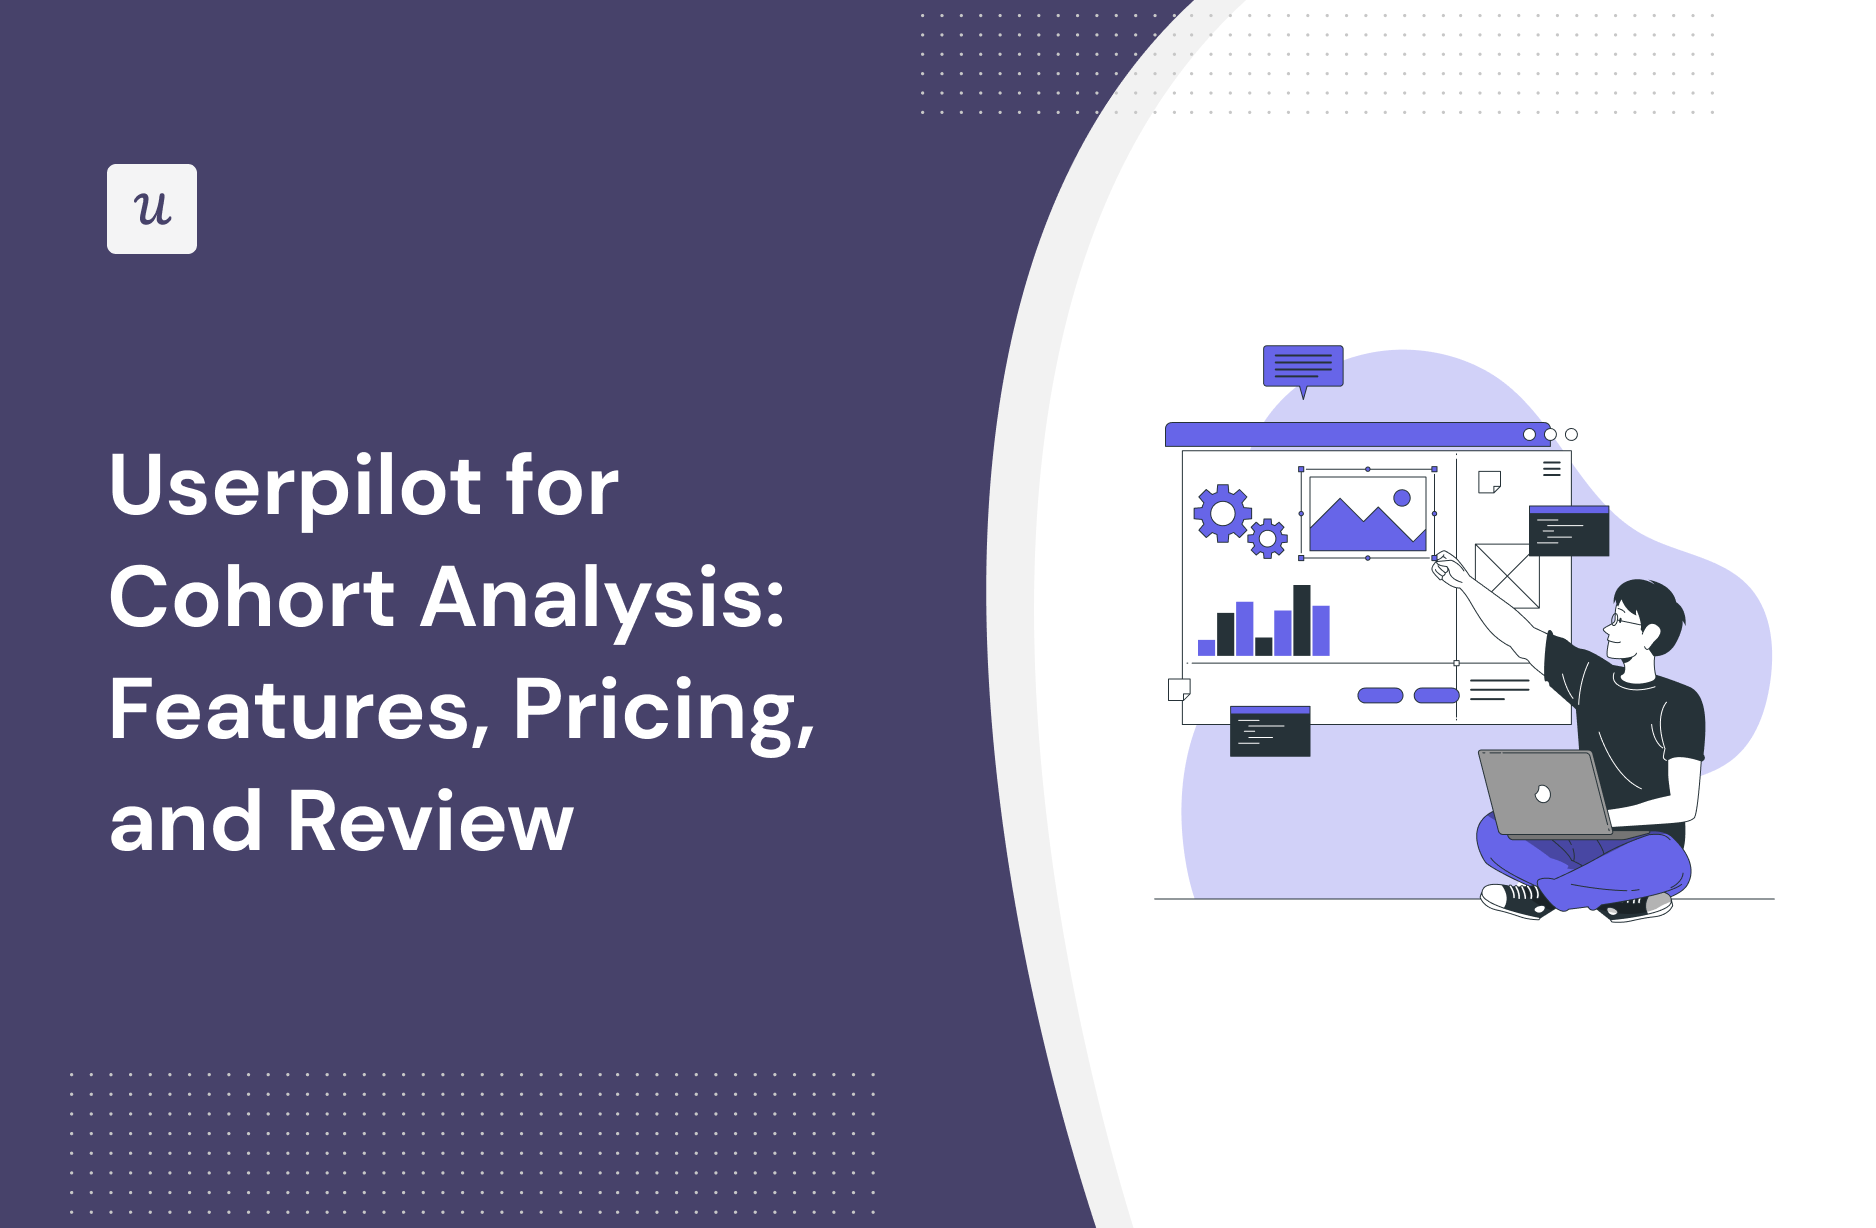 Userpilot for Cohort Analysis: Features, Pricing, and Review